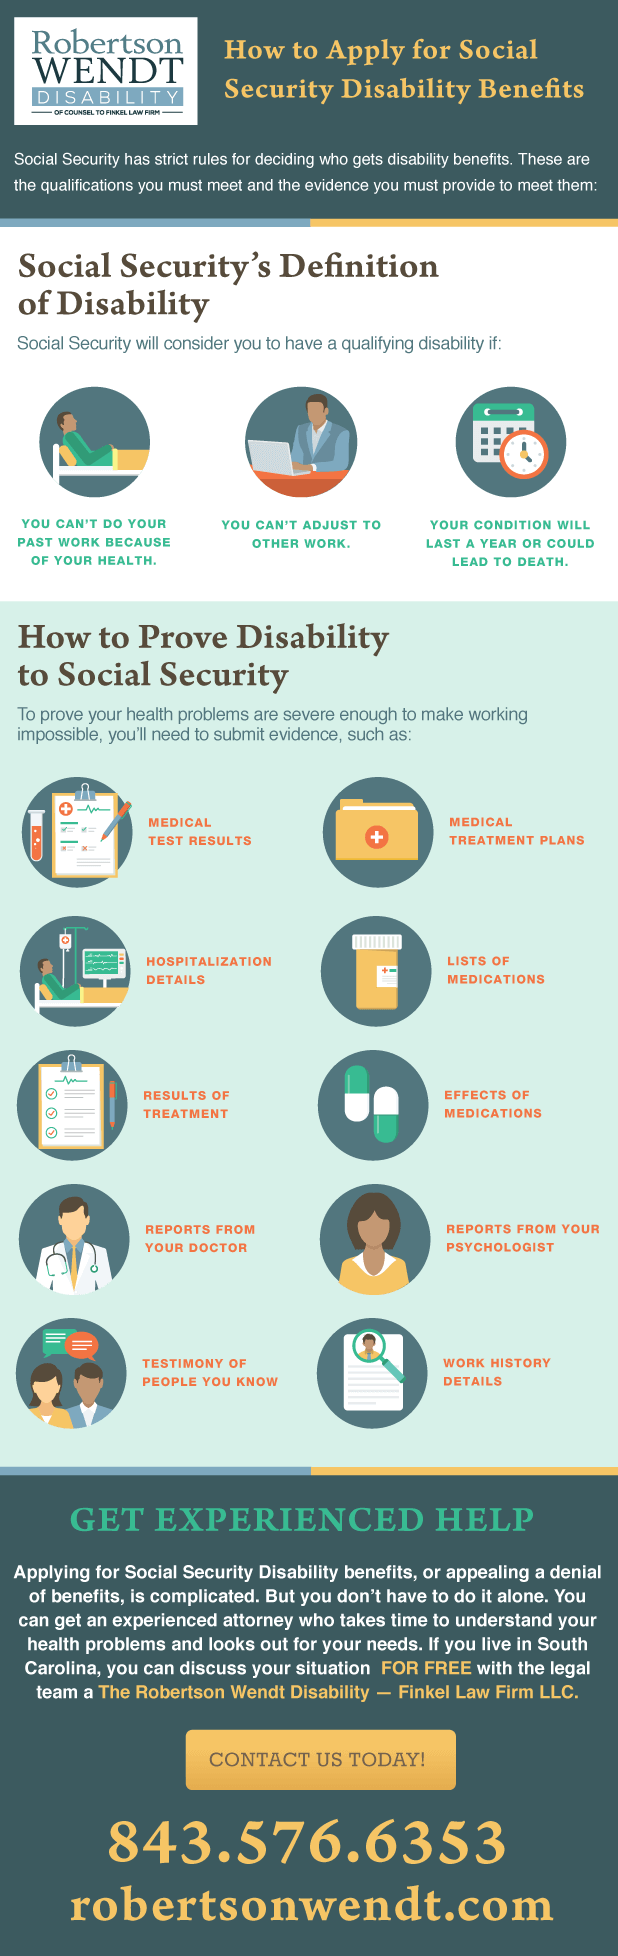 How to Apply for Social Security Disability Benefits Infographic